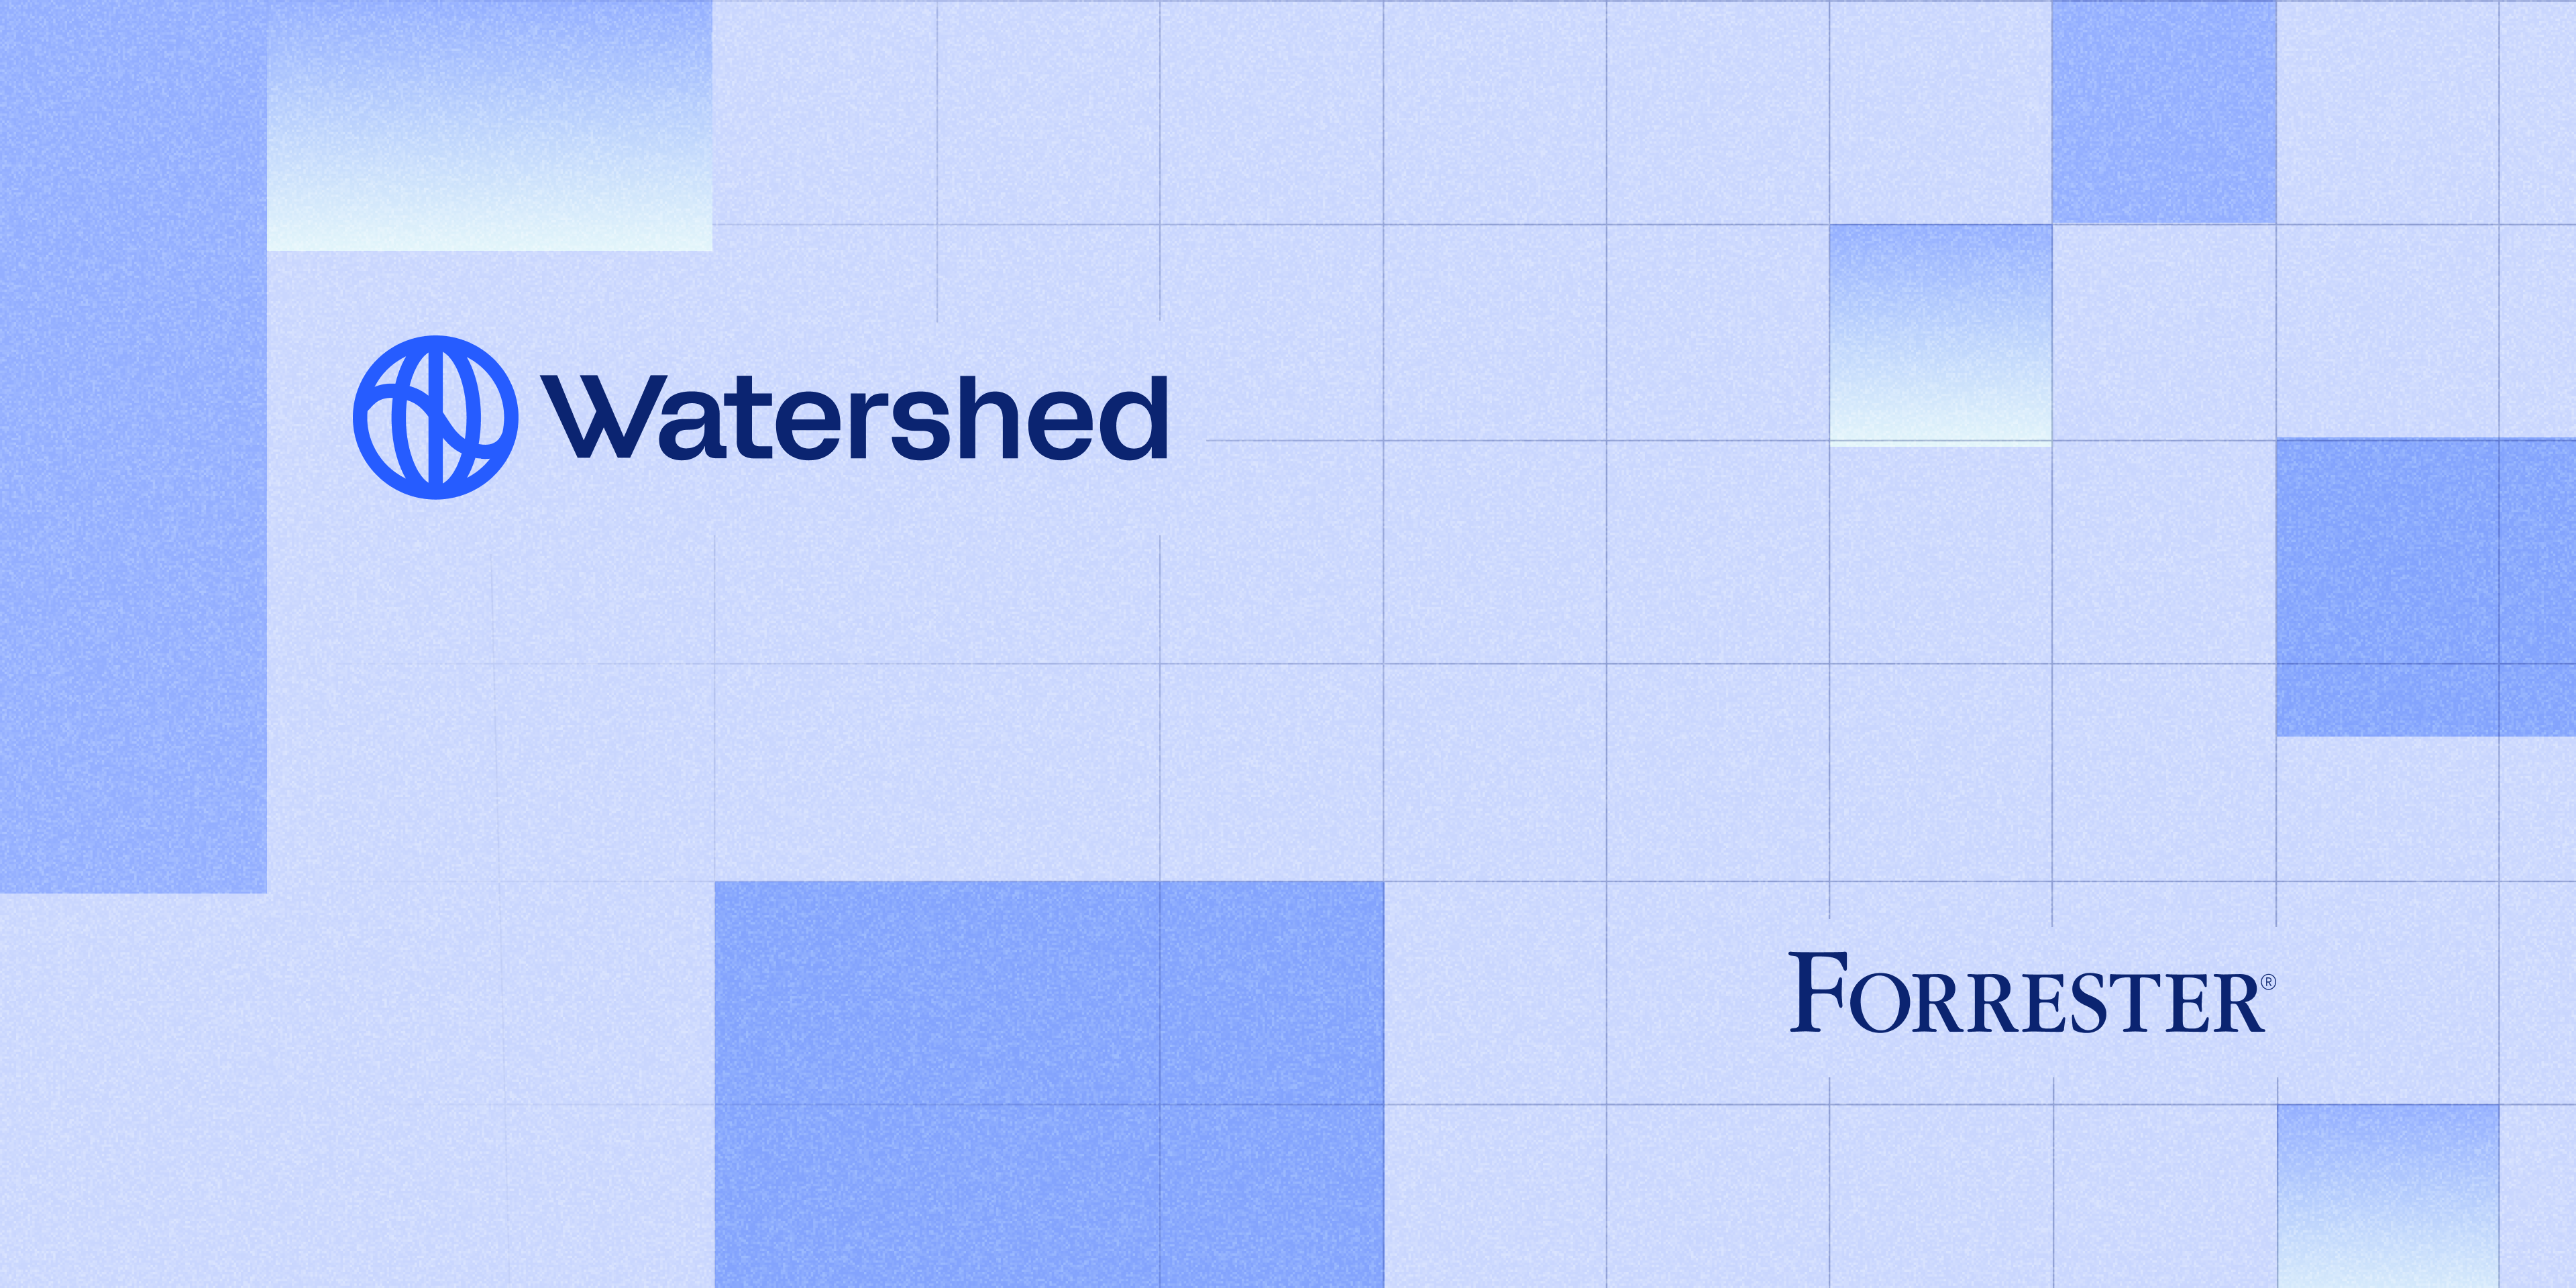 Watershed and Forrester logos